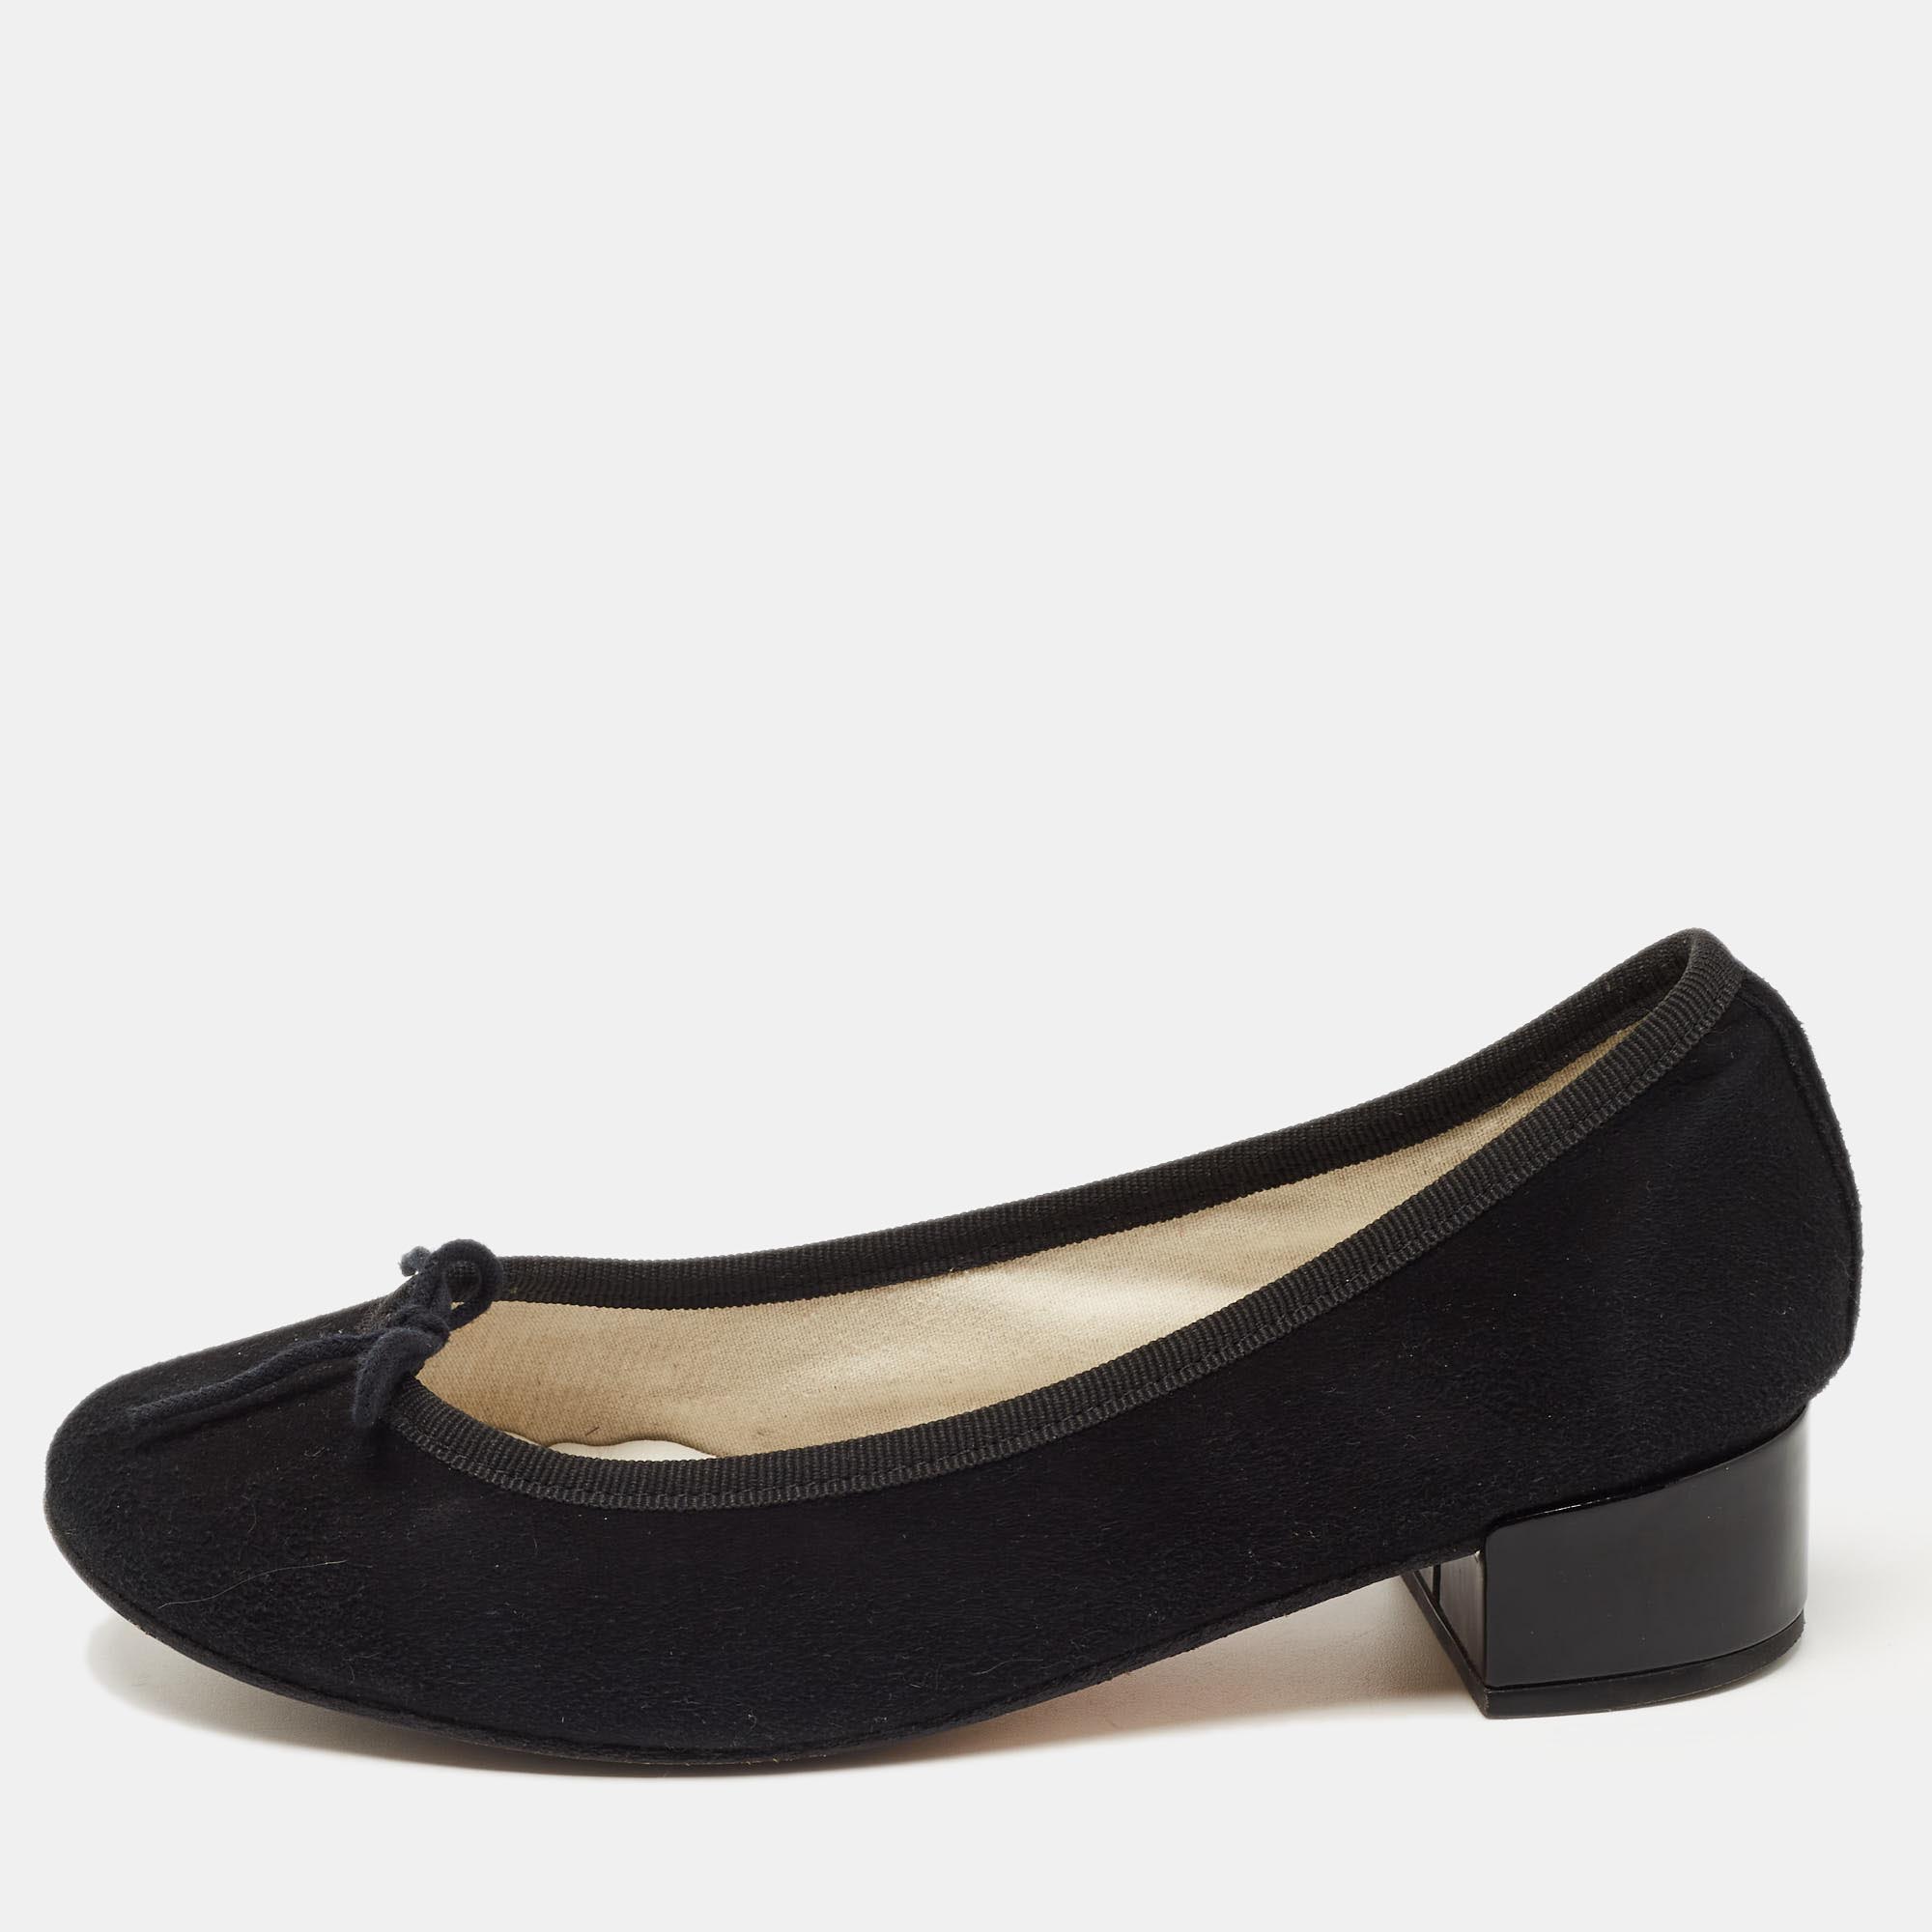 Pre-owned Repetto Black Suede Lili Flats Size 36.5